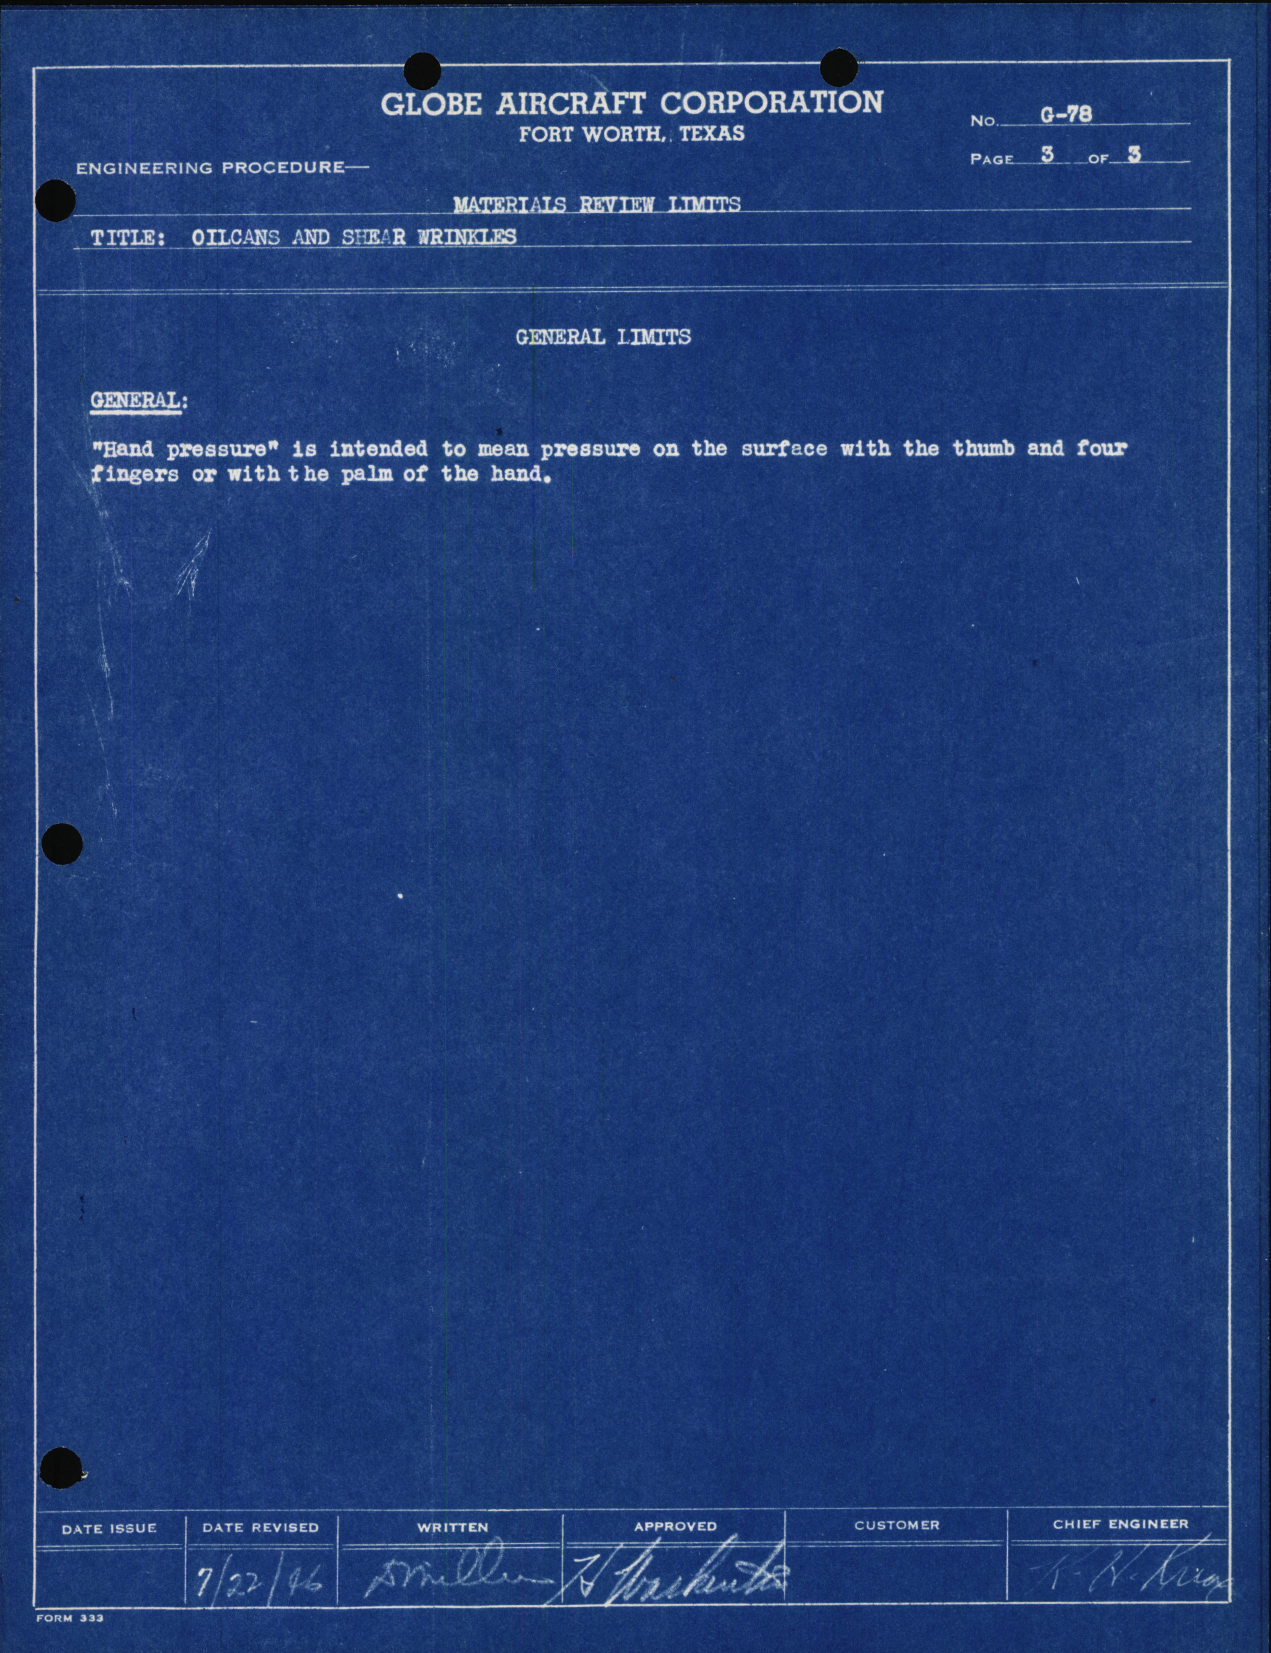 Sample page 6 from AirCorps Library document: Material Review Limits